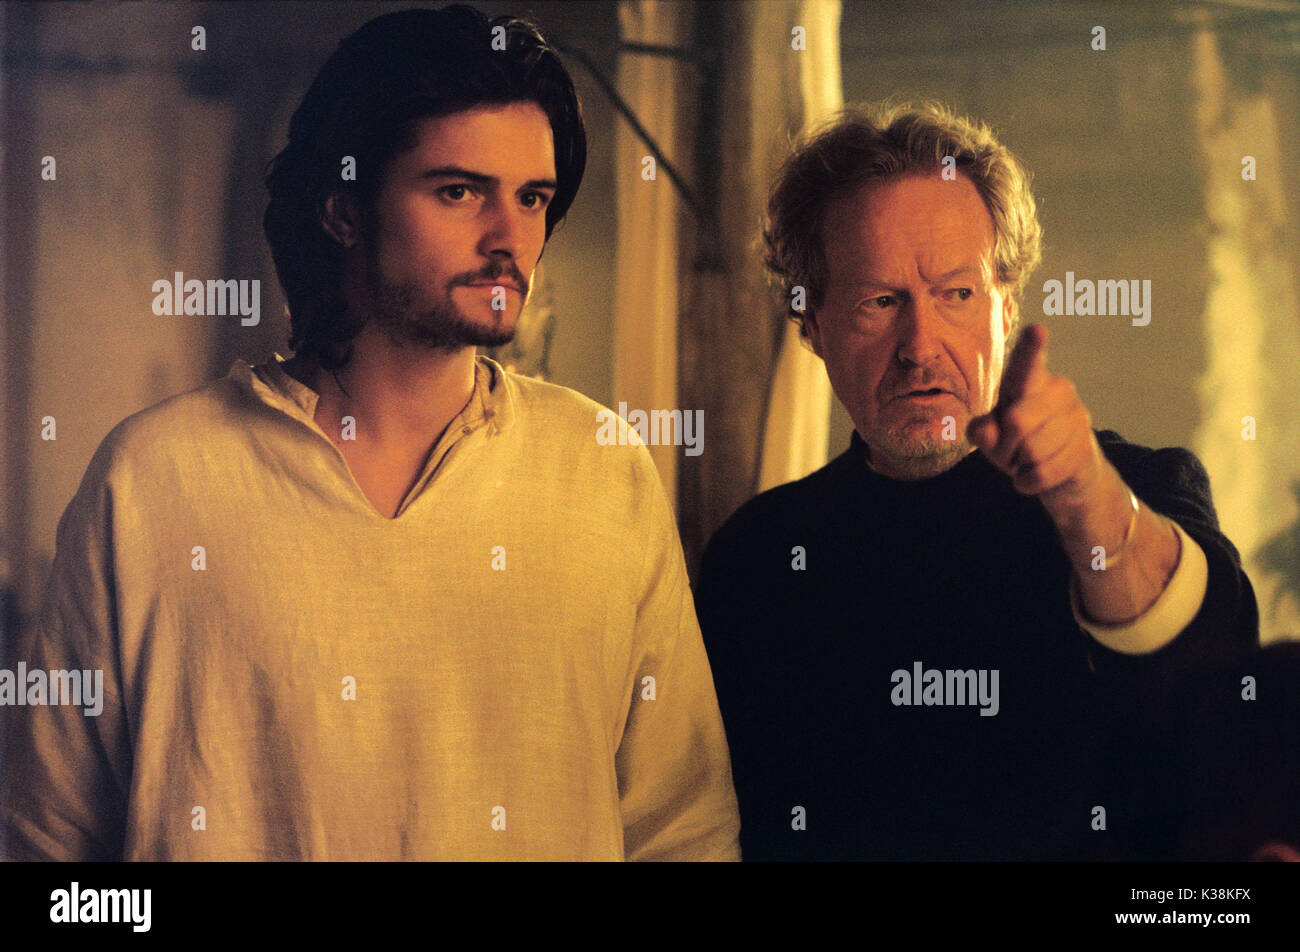 KINGDOM OF HEAVEN ORLANDO BLOOM AND DIRECTOR RIDLEY SCOTT     Date: 2005 Stock Photo